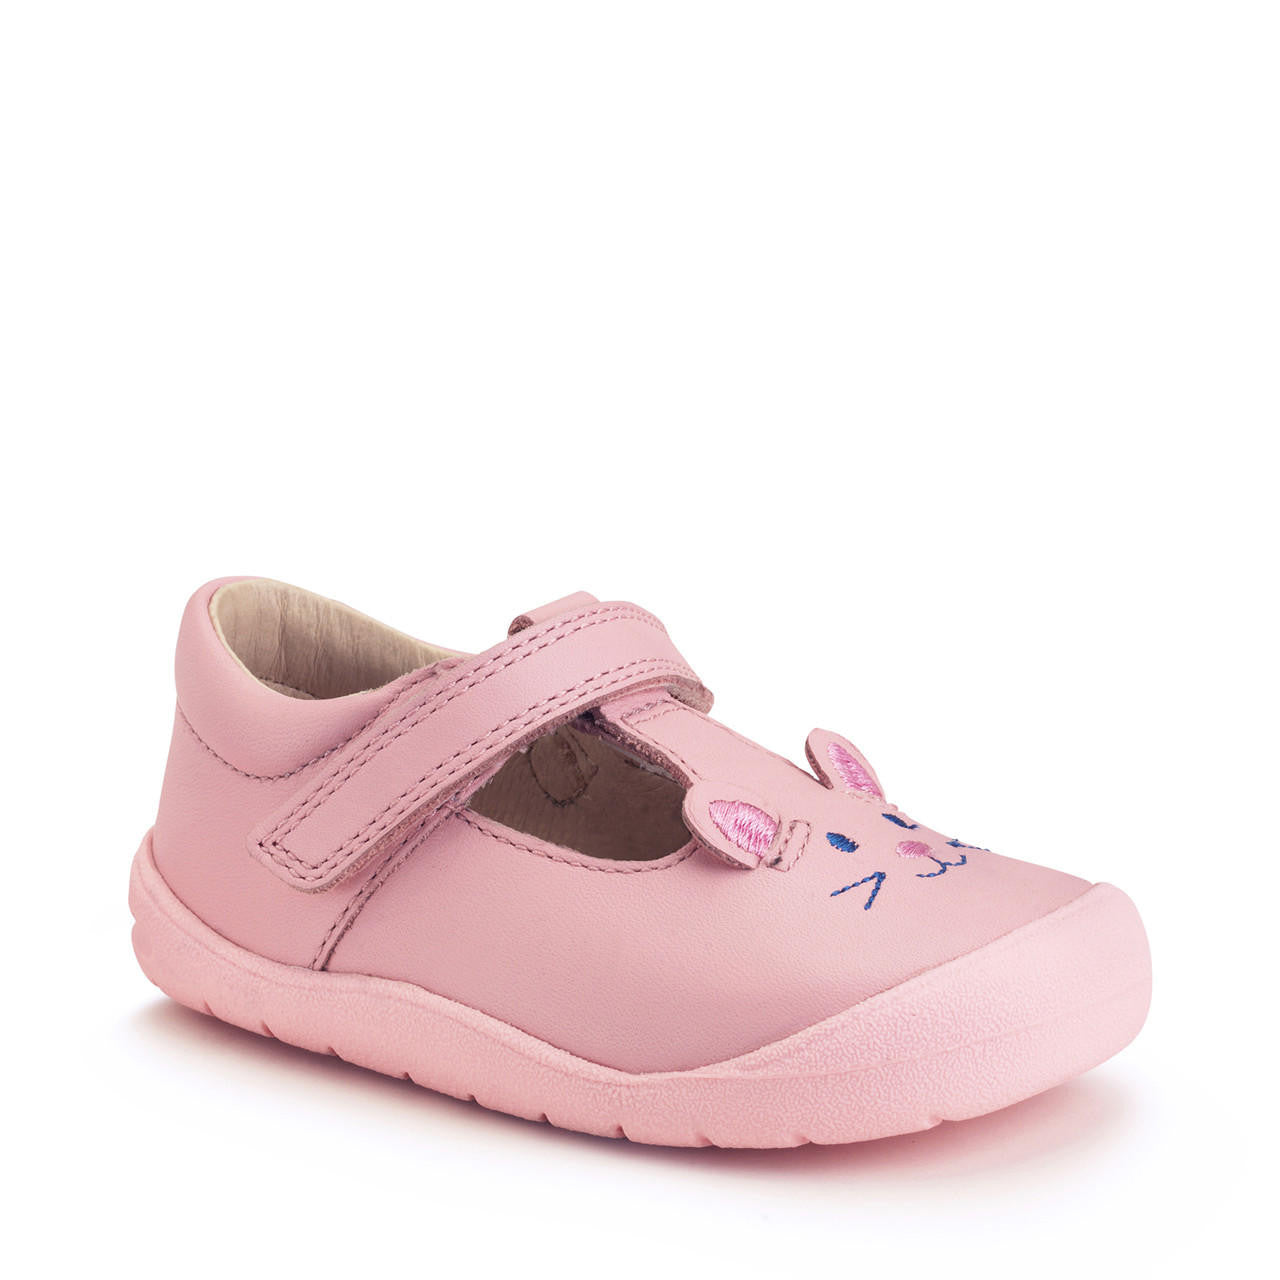 StartRite FELLOW Leather Shoes (Pink)